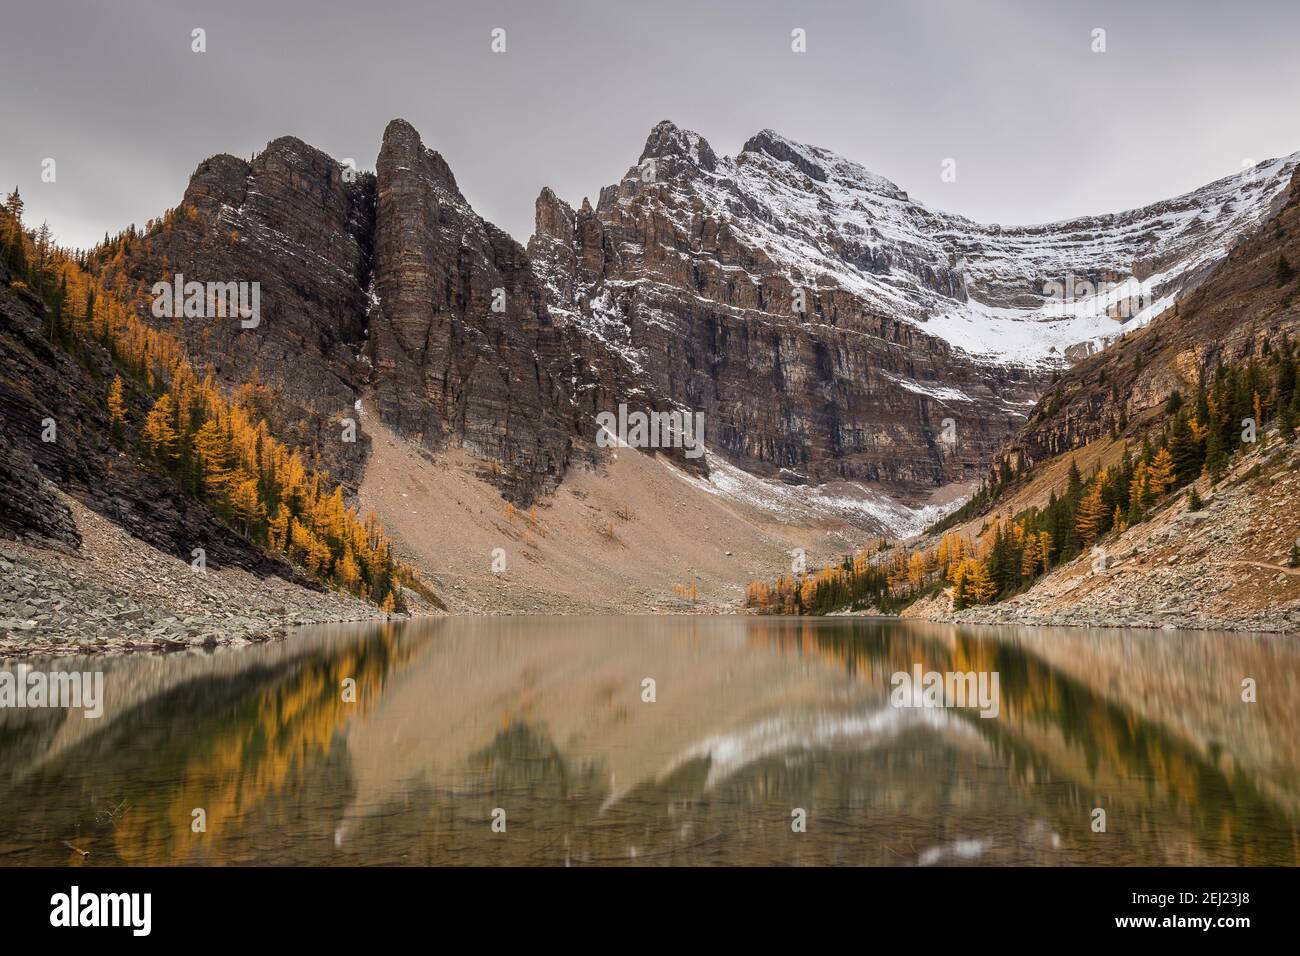 Mountain peaks with snow during fall, rocks, yellow and green larches along a lake with clear reflections under a gray sky. Lake Louis, Banff, Canada Stock Photo